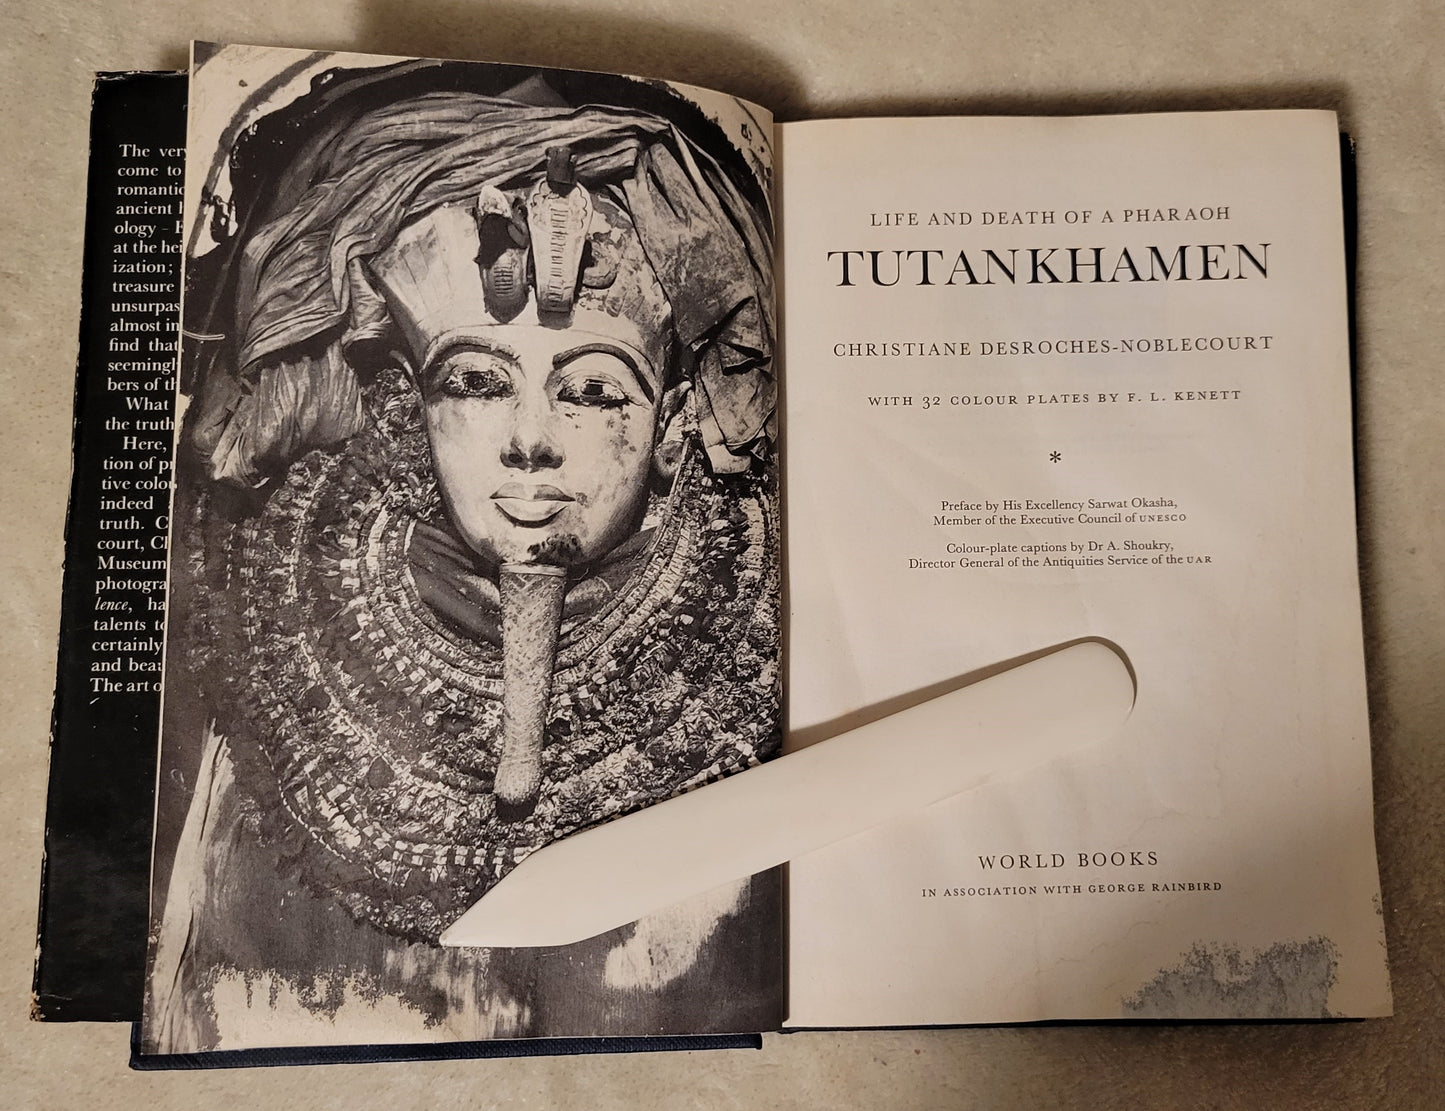 Used book for sale "Tutankhamen: Life and Death of a Pharaoh" by Christiane Deroches-Noblecourt, 1967 World Books edition. Title page.